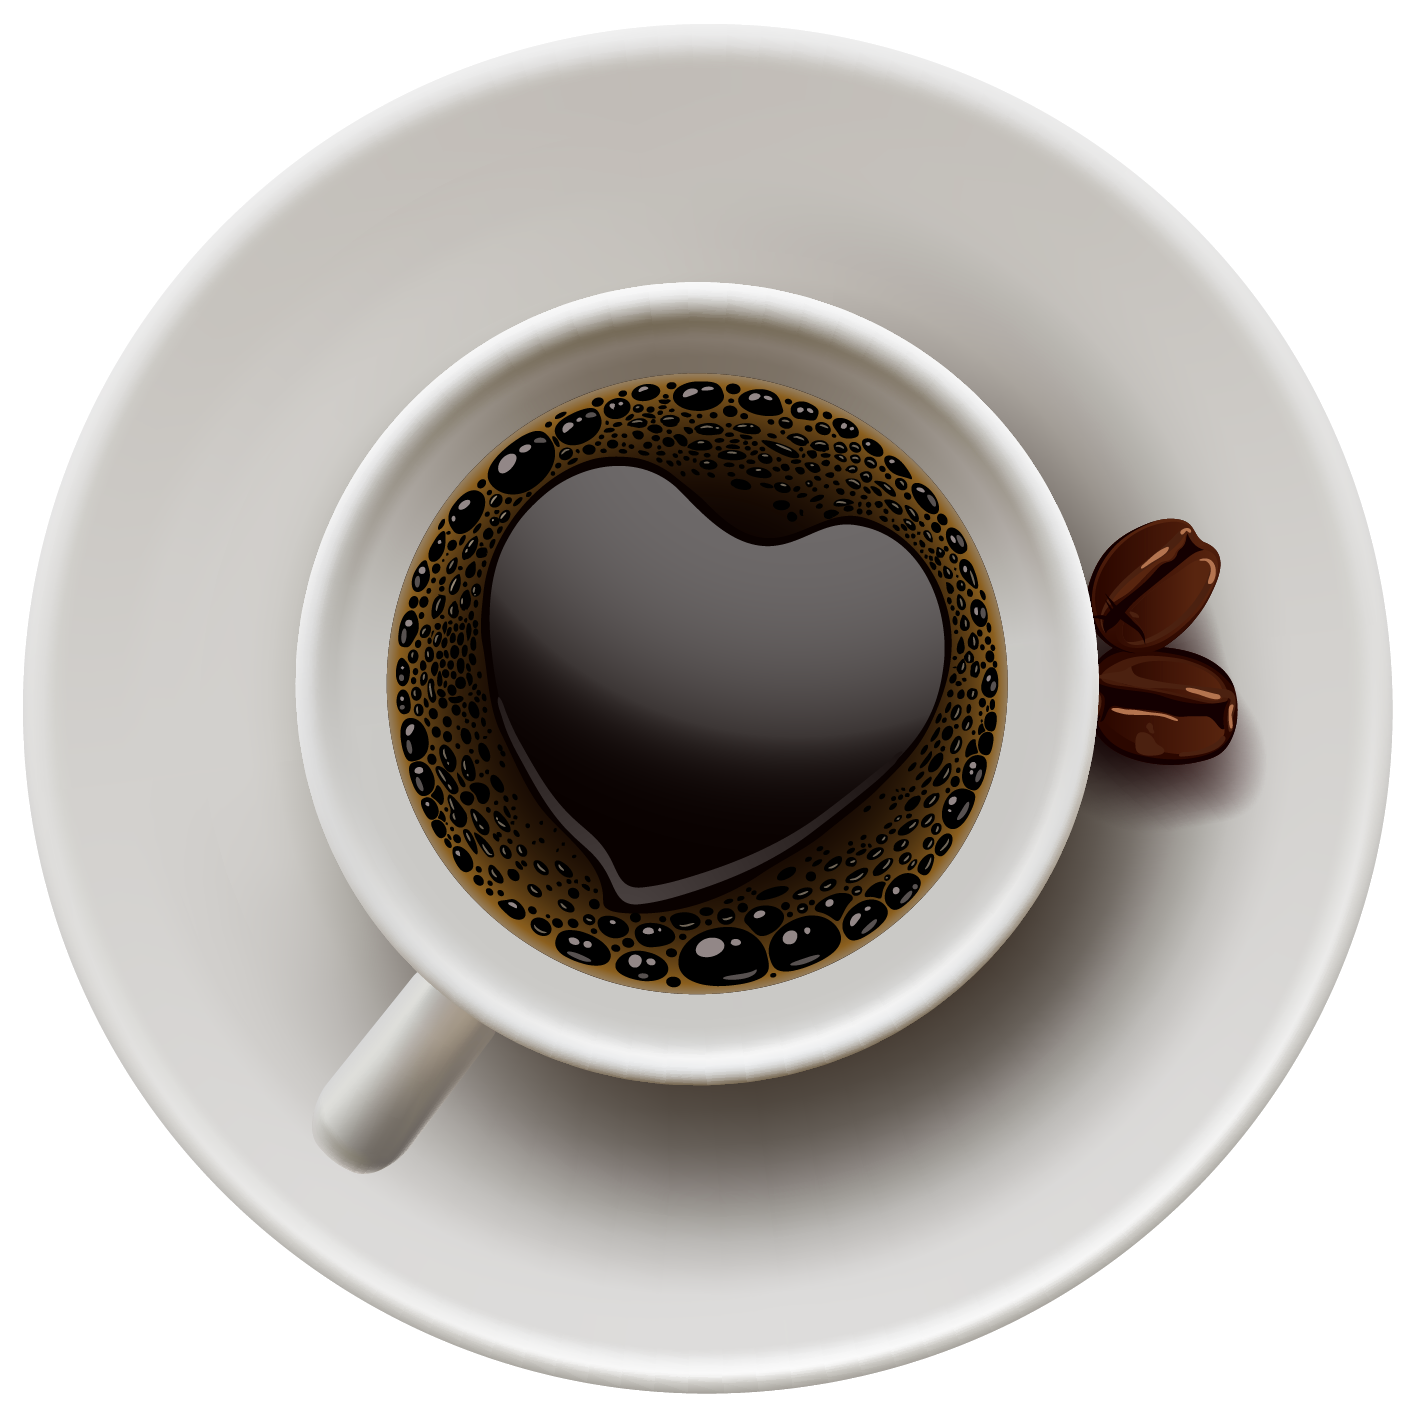 Cup, mug coffee PNG images free download